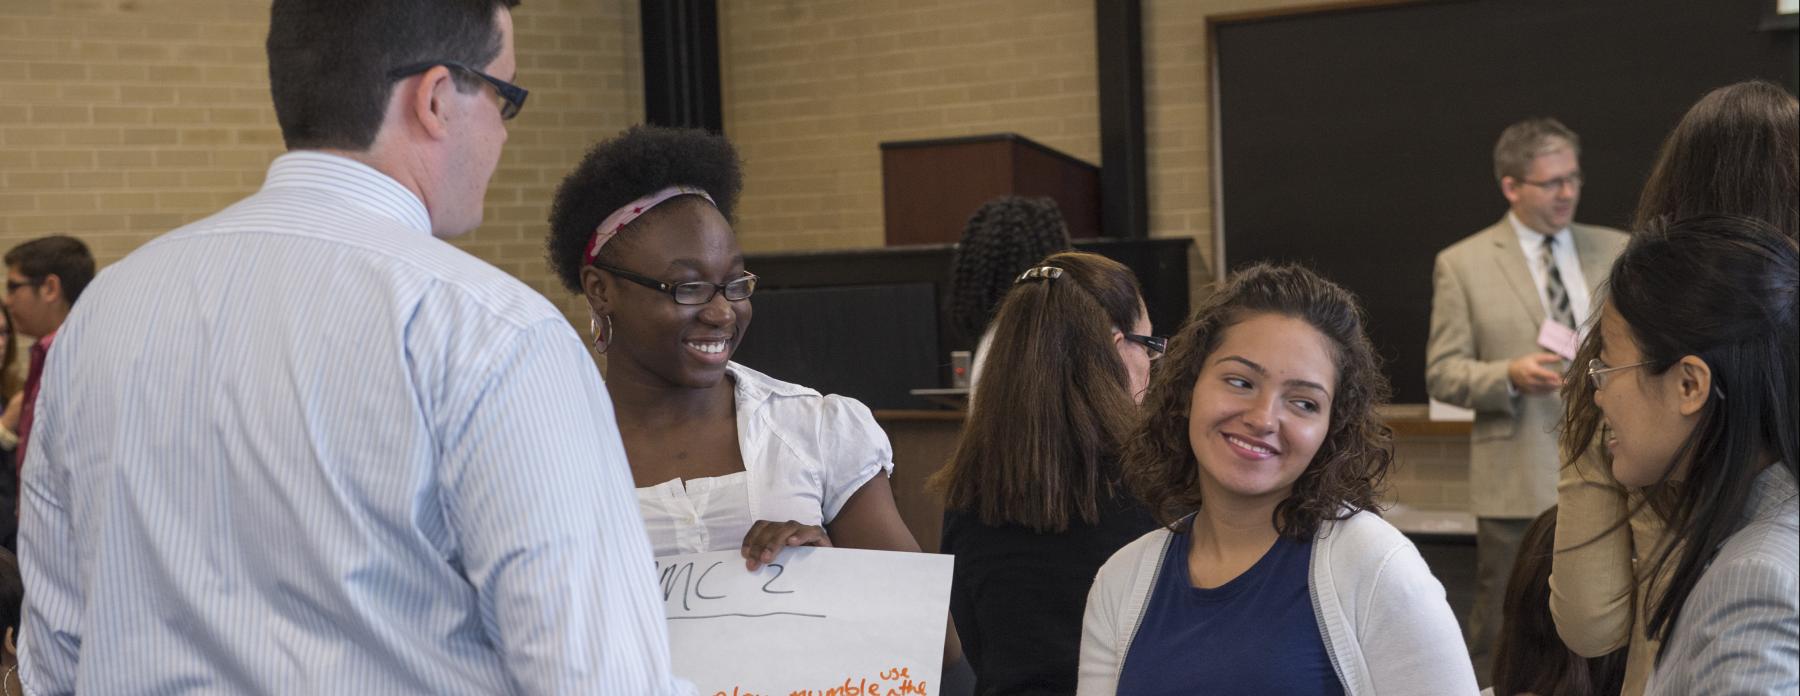 UTEP students talk to one another at an event